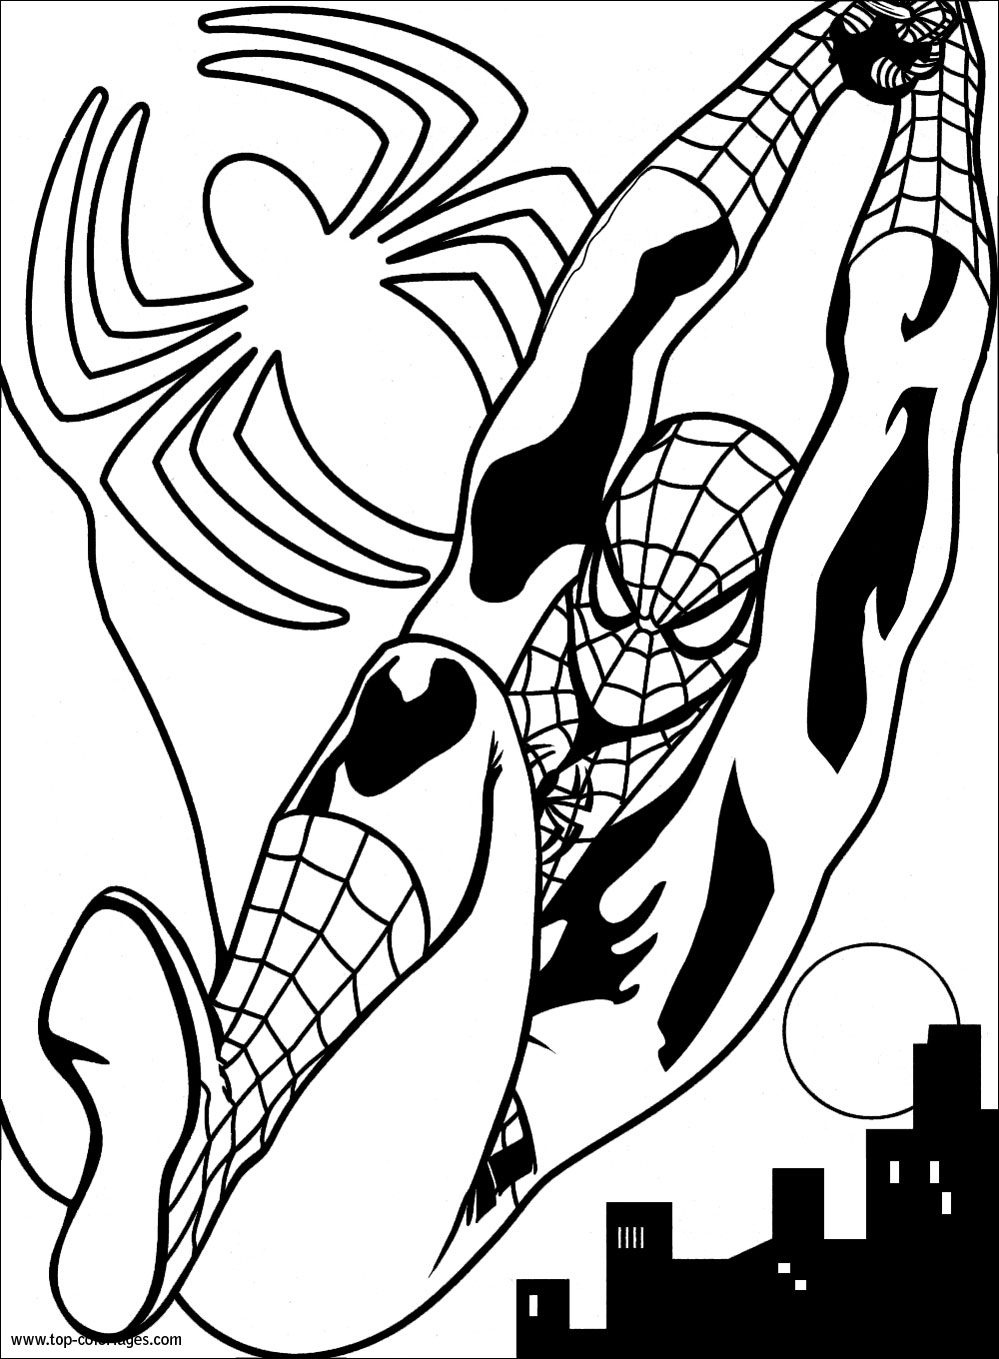 http://www.top-coloriages.com/coloriages/spiderman/coloriage/spiderman-3.jpg